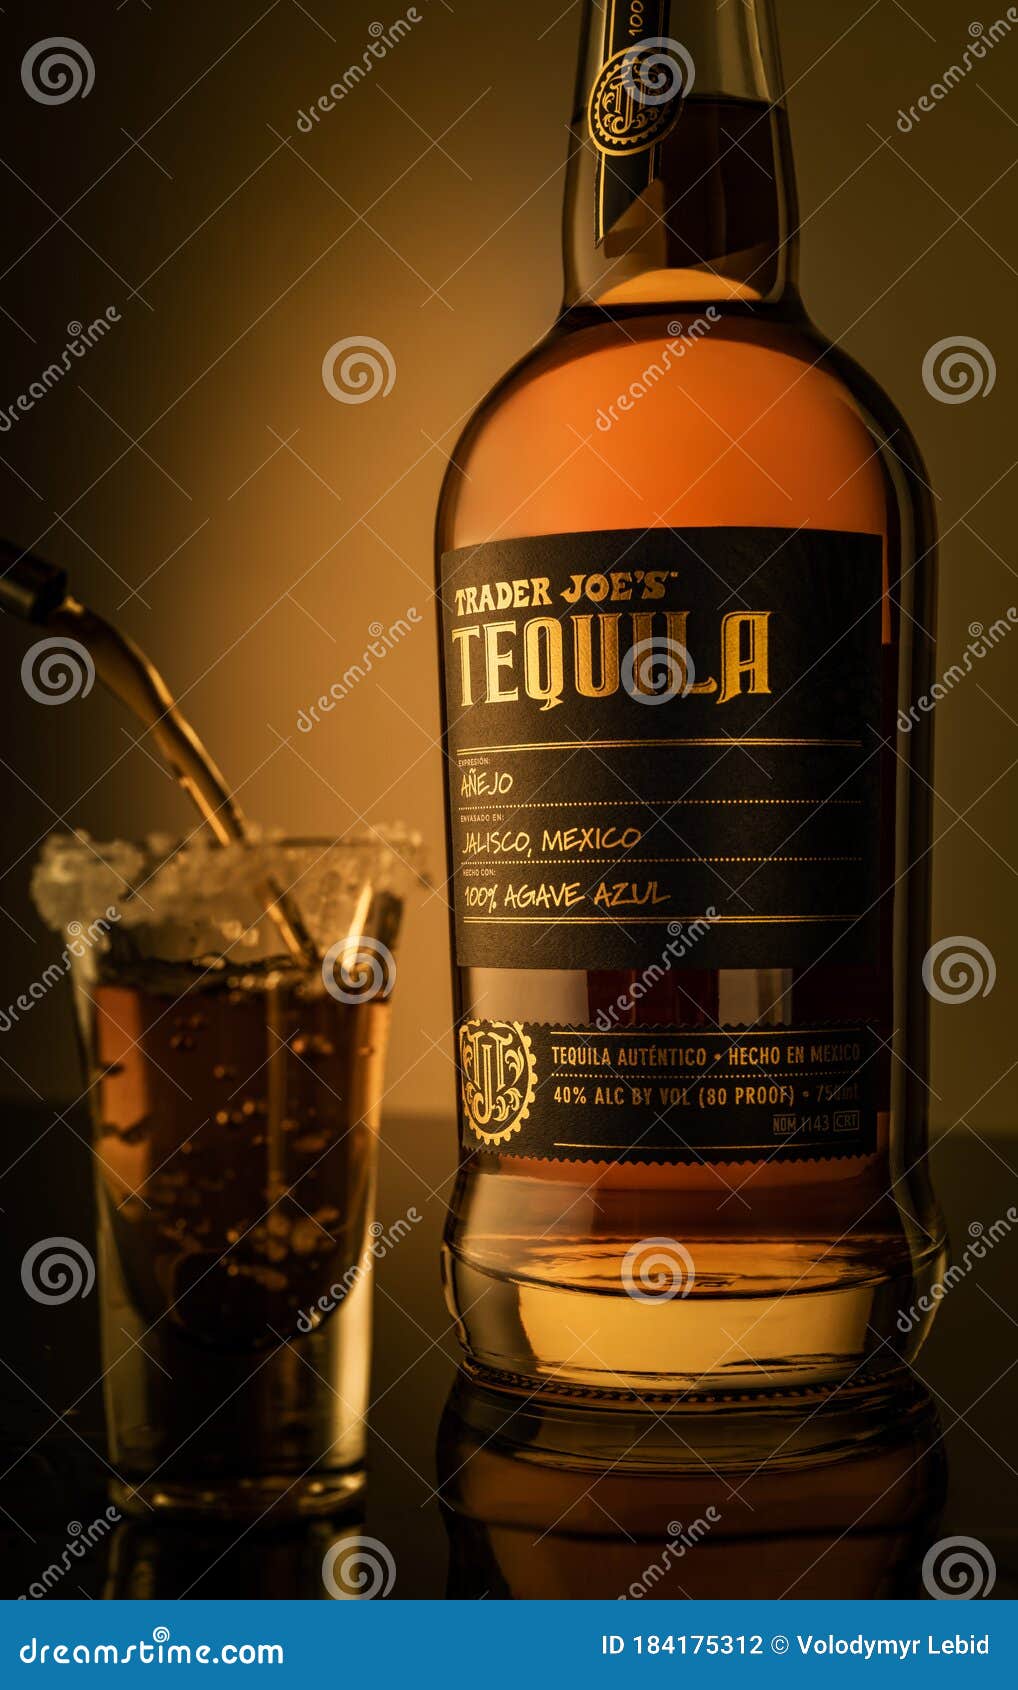 Download Kiev Ukraine May 09 2020 A Bottle Of Tequila Trader Joe S On An Orange Yellow Background Next To A Glass Of Editorial Photography Image Of Amber Cenobio 184175312 Yellowimages Mockups